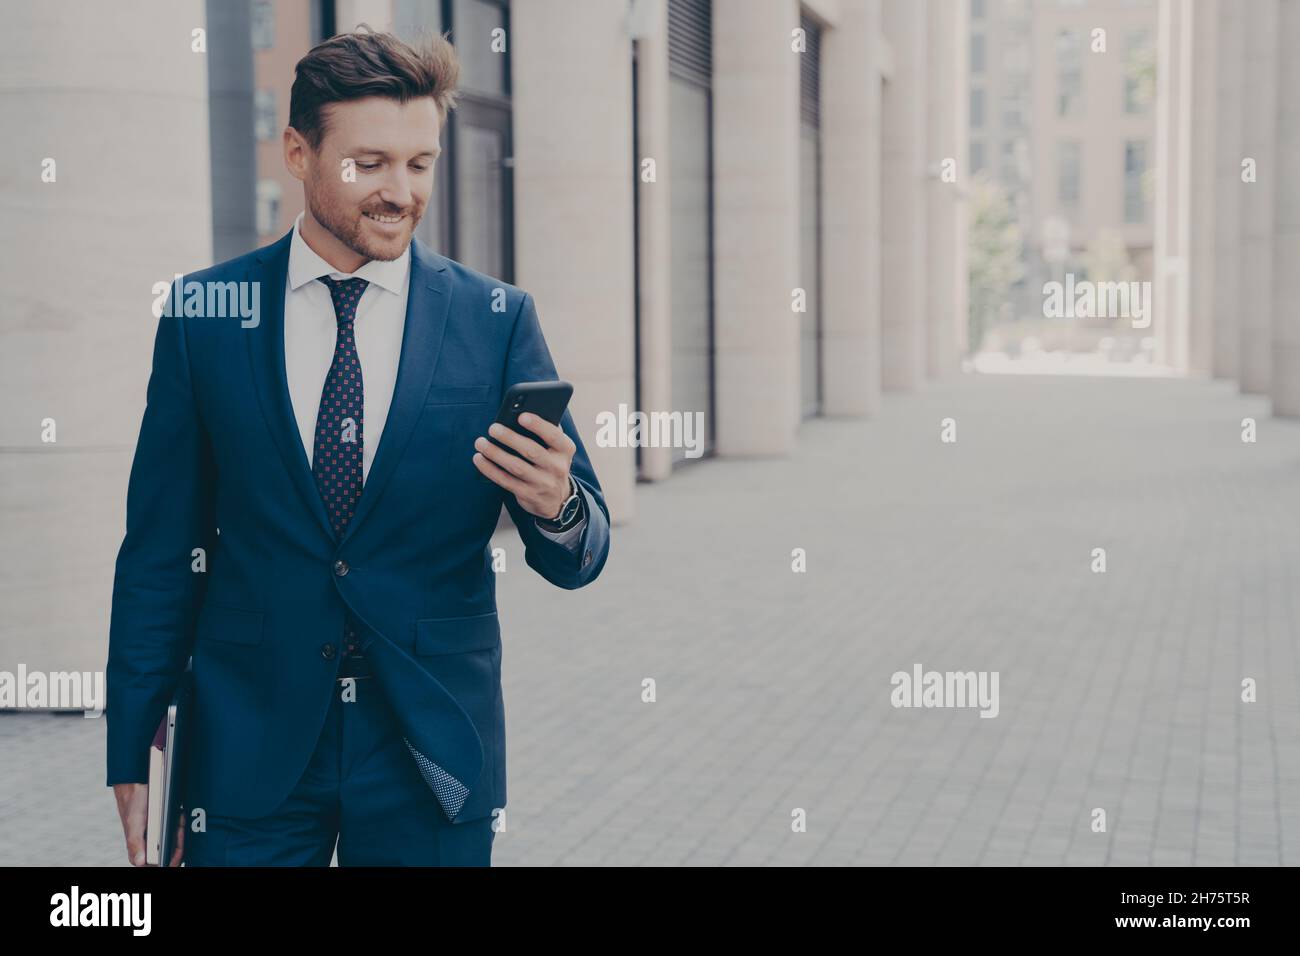 Young smiling successful male ceo executive looking at smartphone with satisfied expression outside Stock Photo